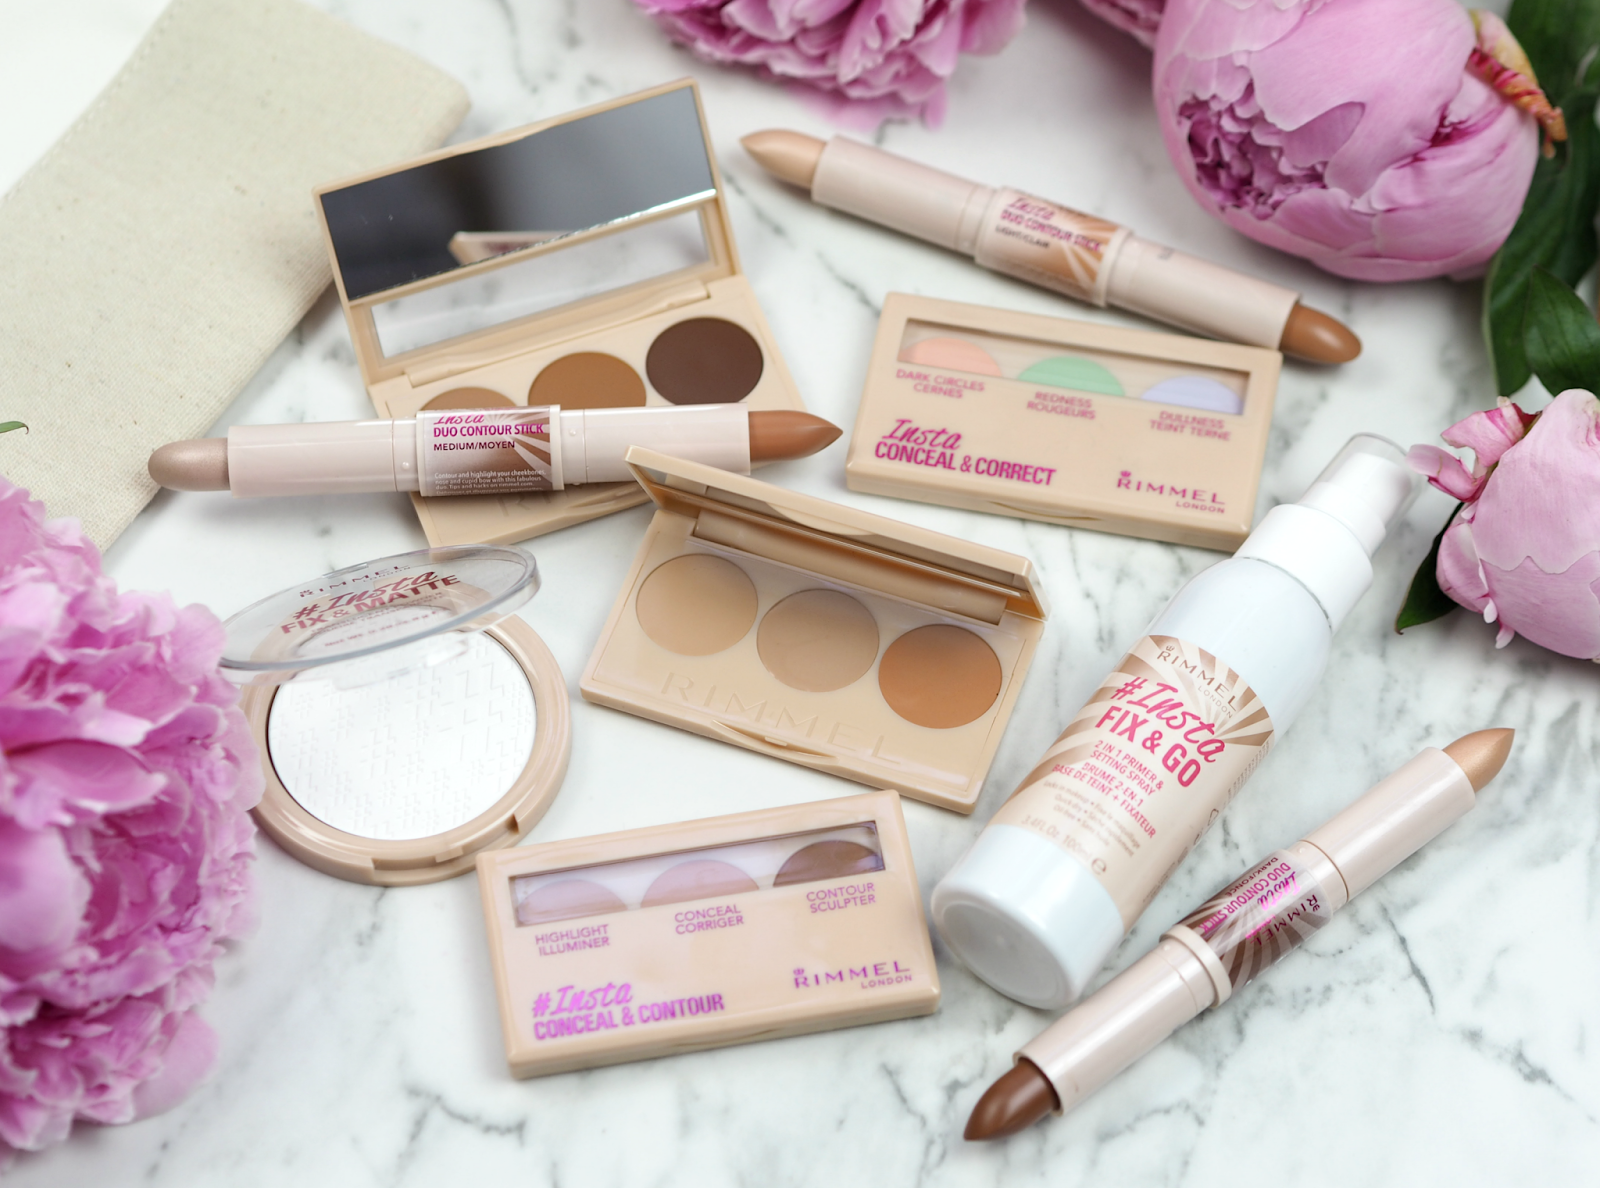 Rimmel London's New Makeup Claims To Make Us More 'Instagrammable': But Do We Really Need It"